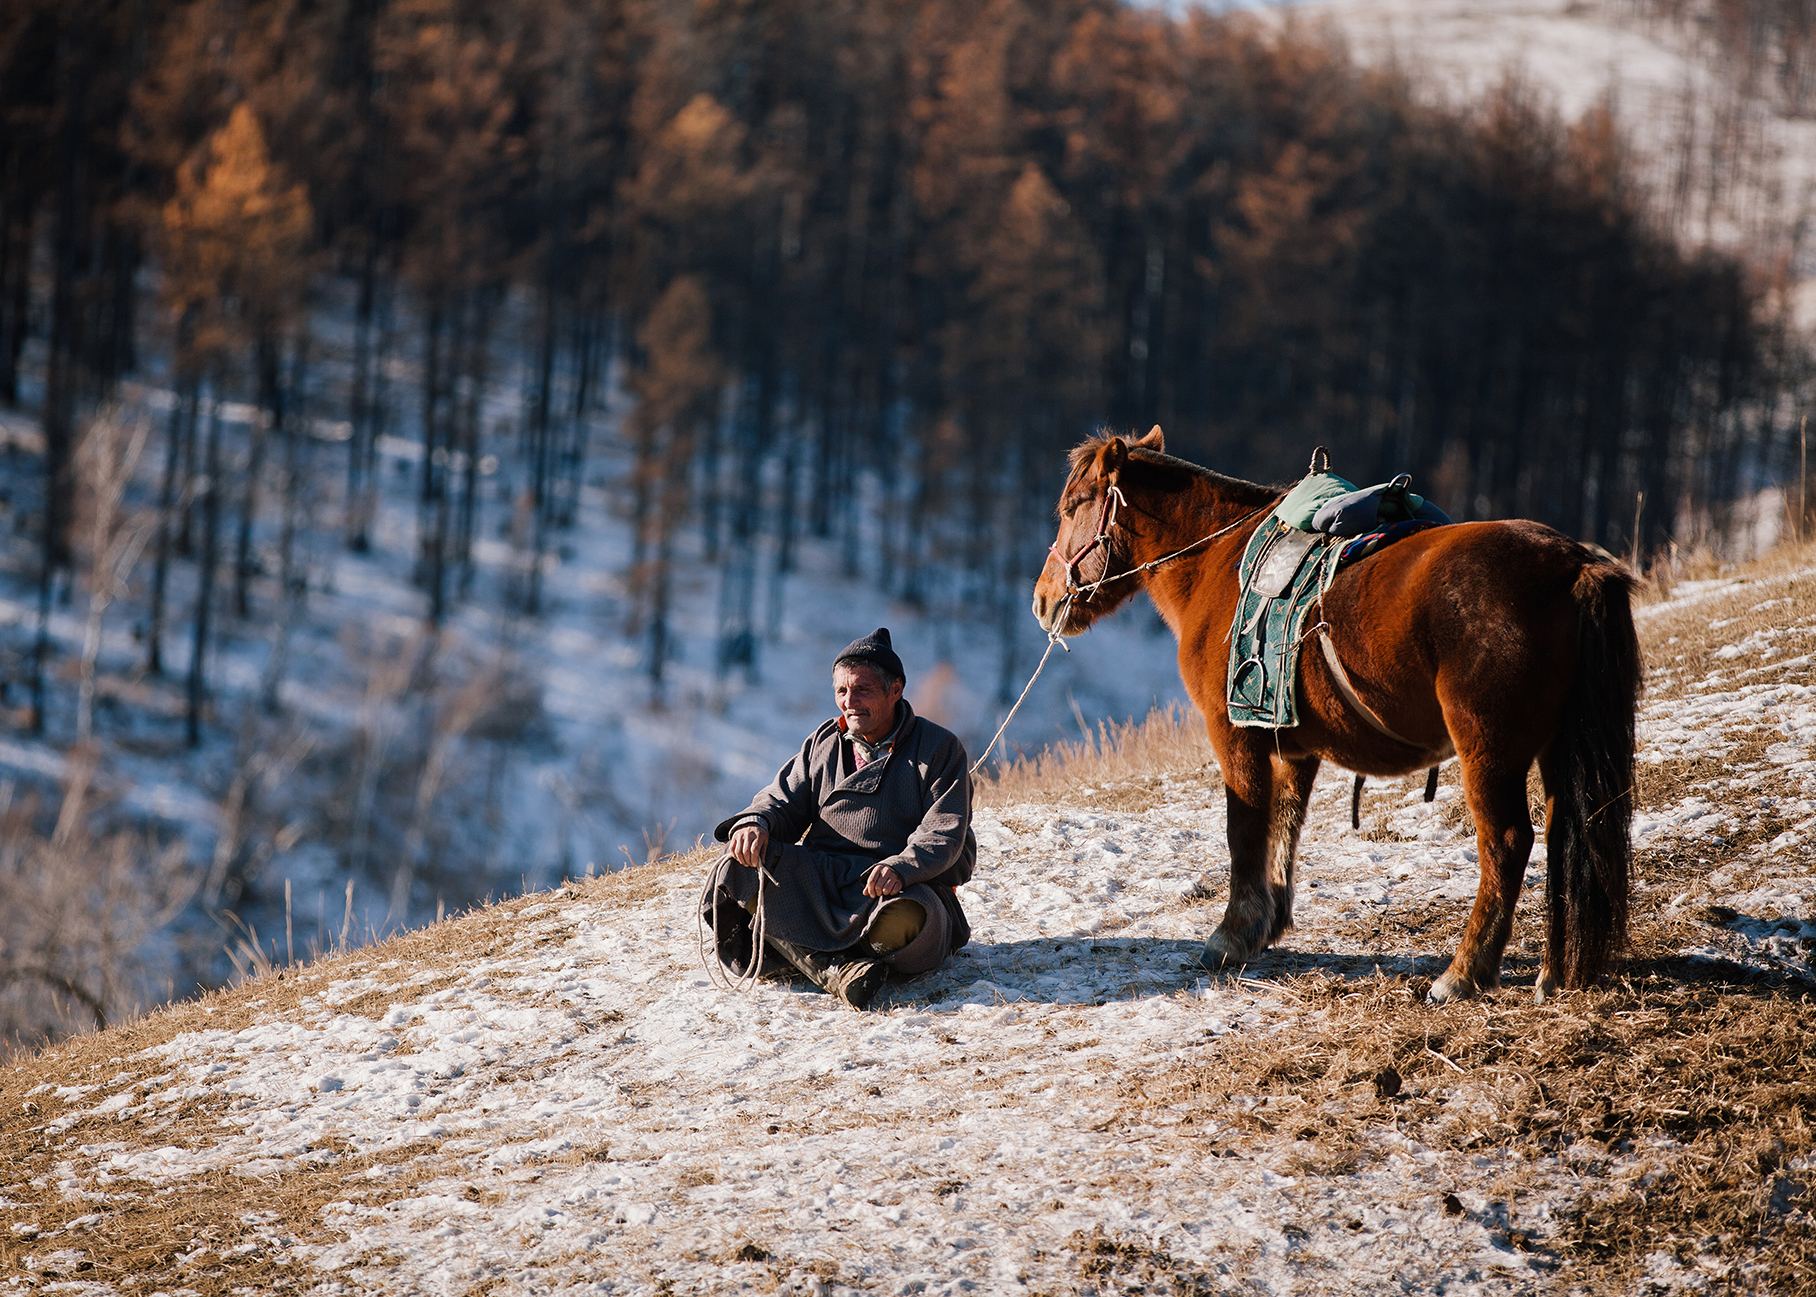 Man and his horse, Mongolia